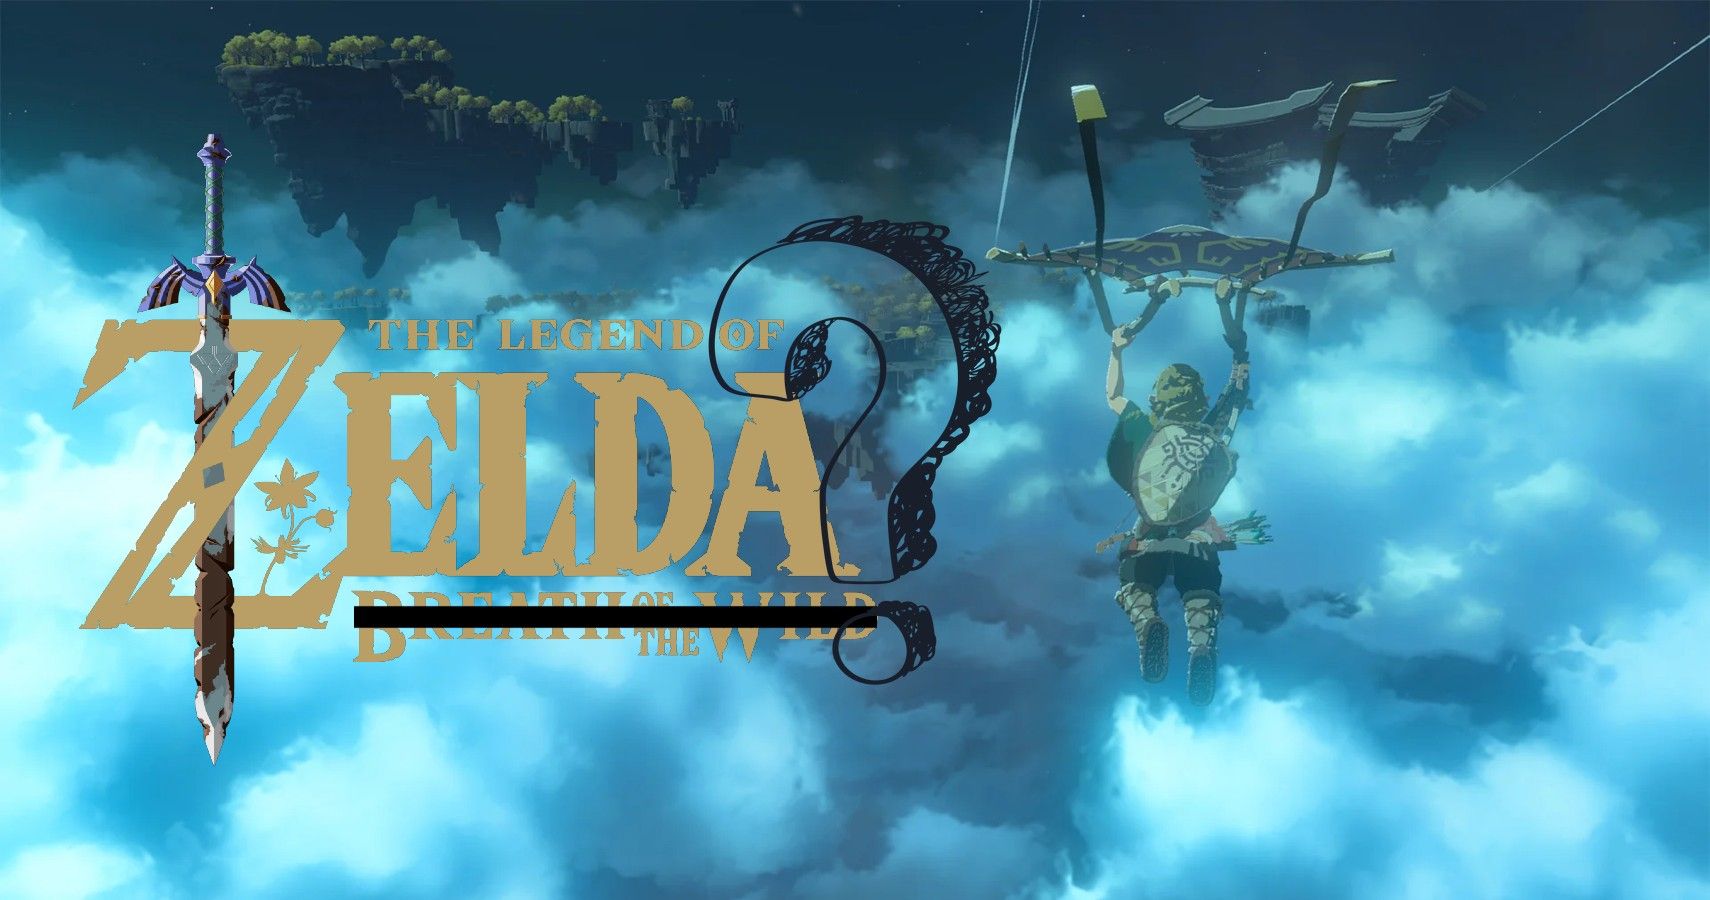 obviously, Zelda names are kind of important,” Trinen said. “Those subtitles, they start to give little bits of hints about maybe what’s going to happen.